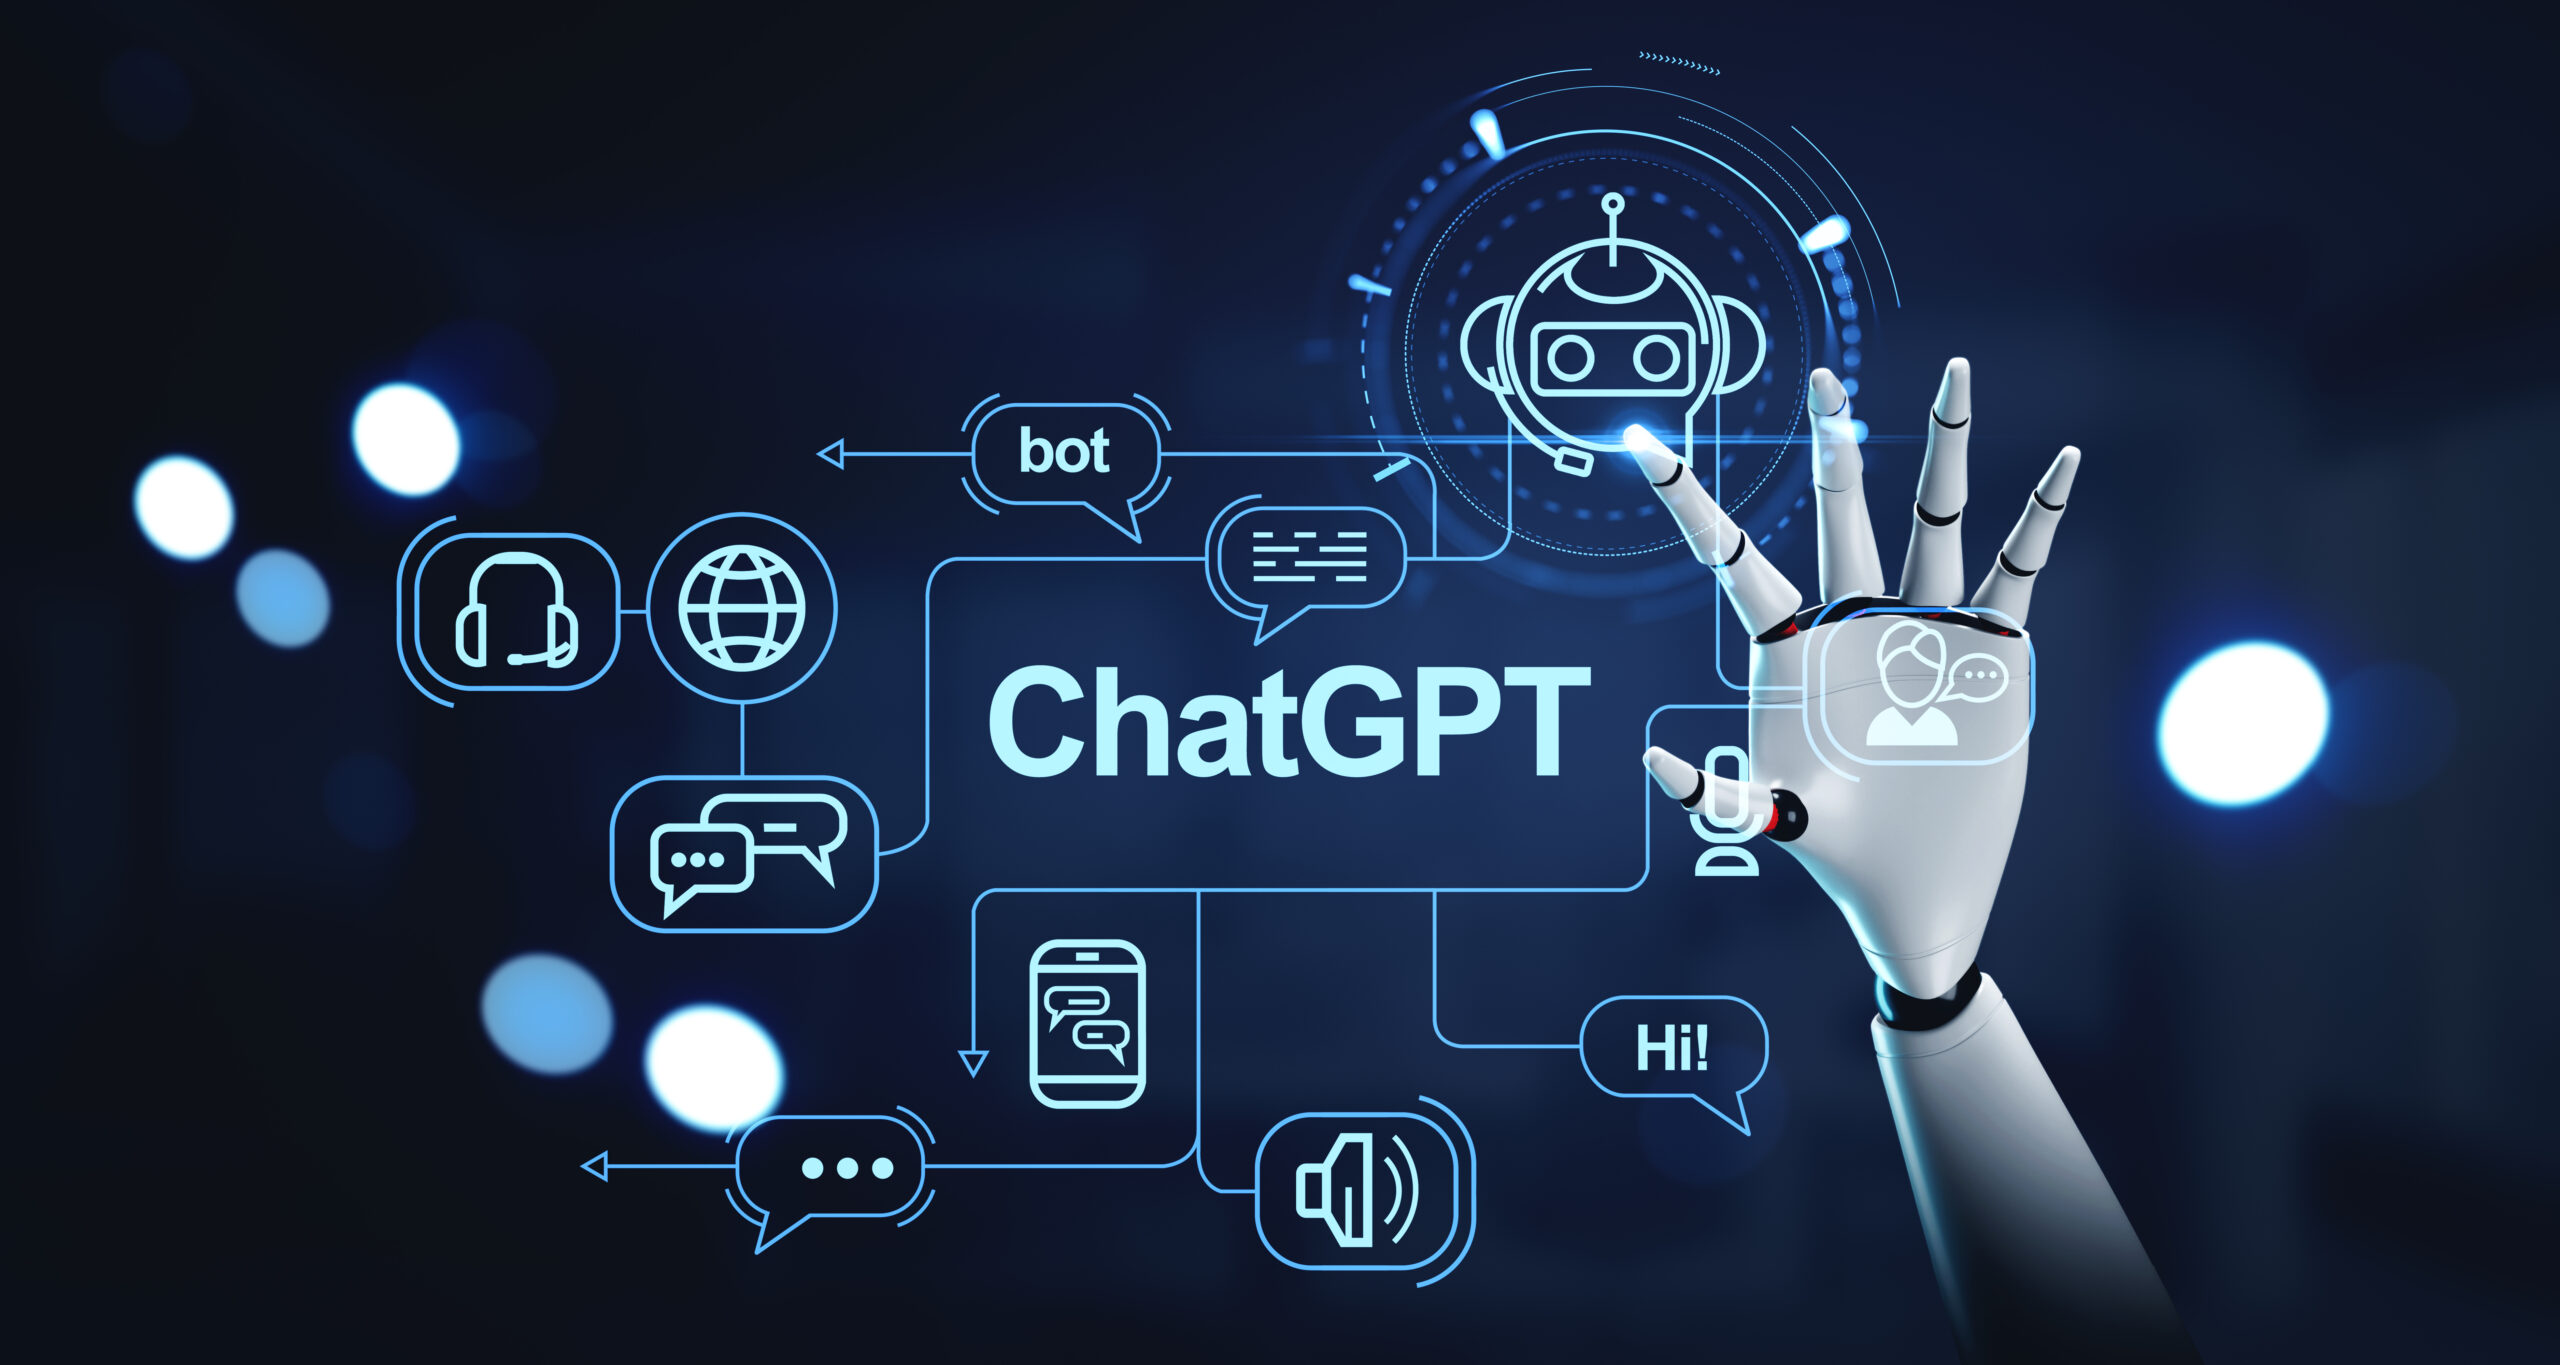 What Really Happened When Fullpath’s ChatGPT Chatbot Went Viral